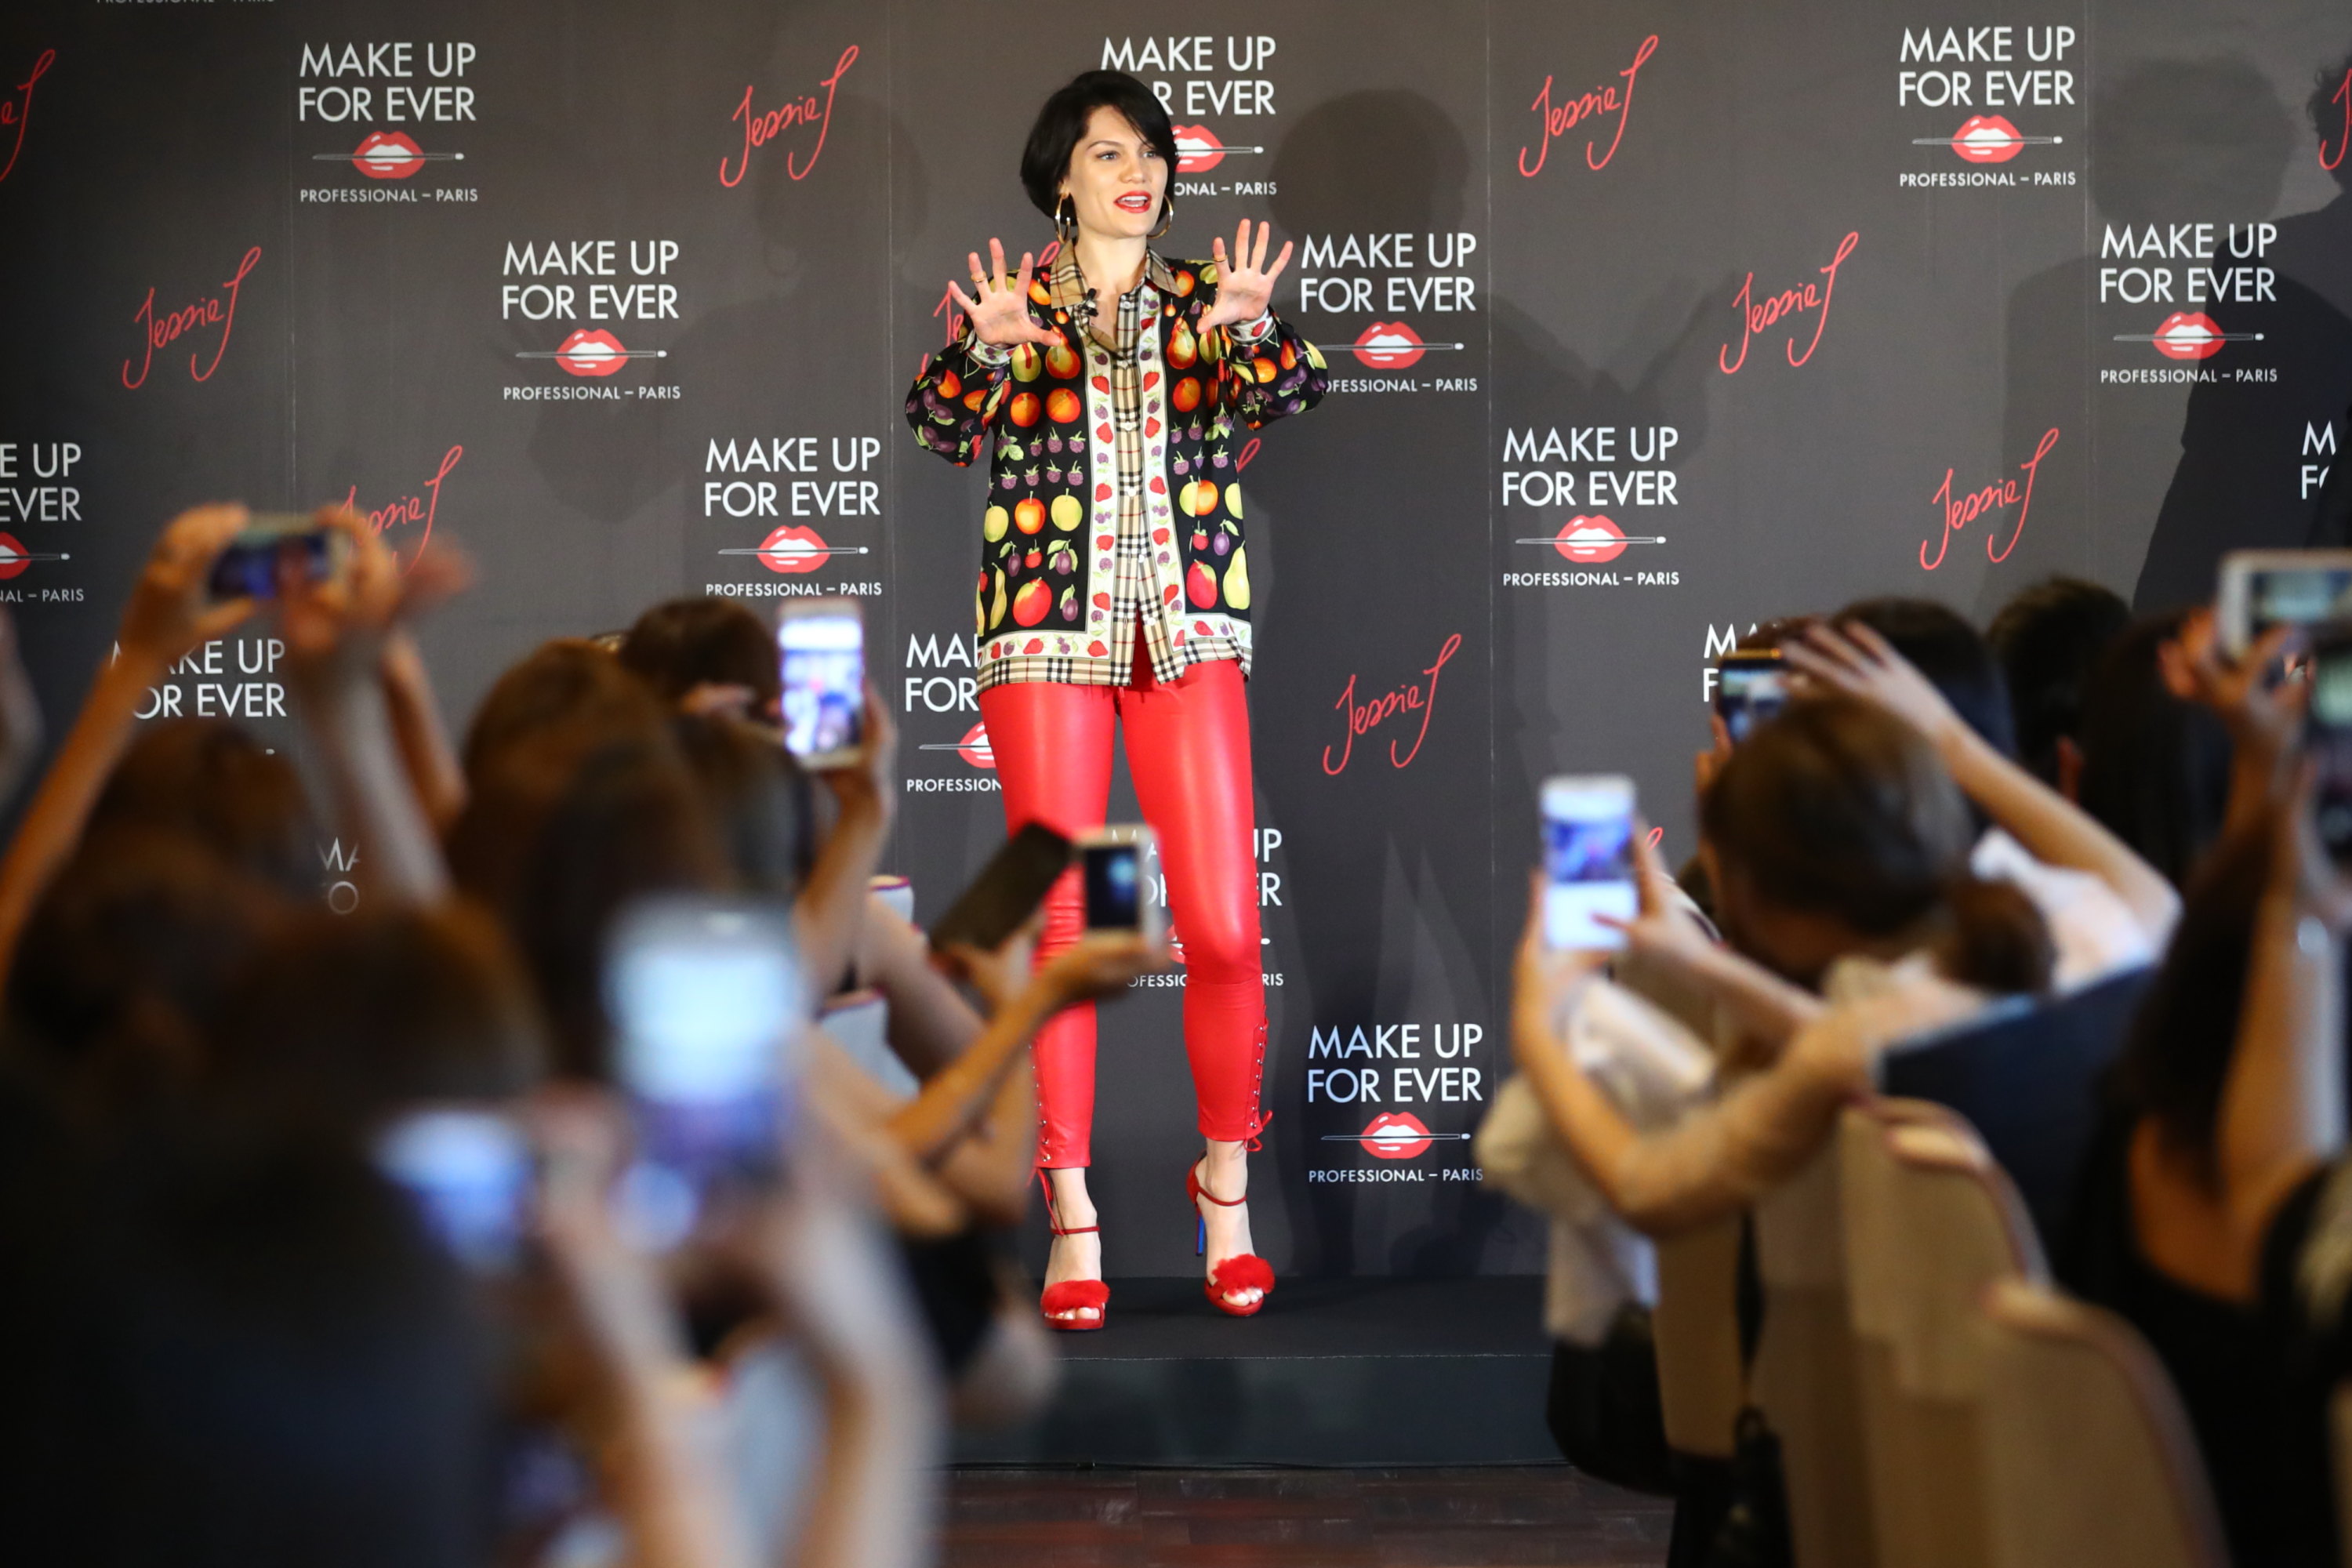 Jessie J attends a photo call and press conference